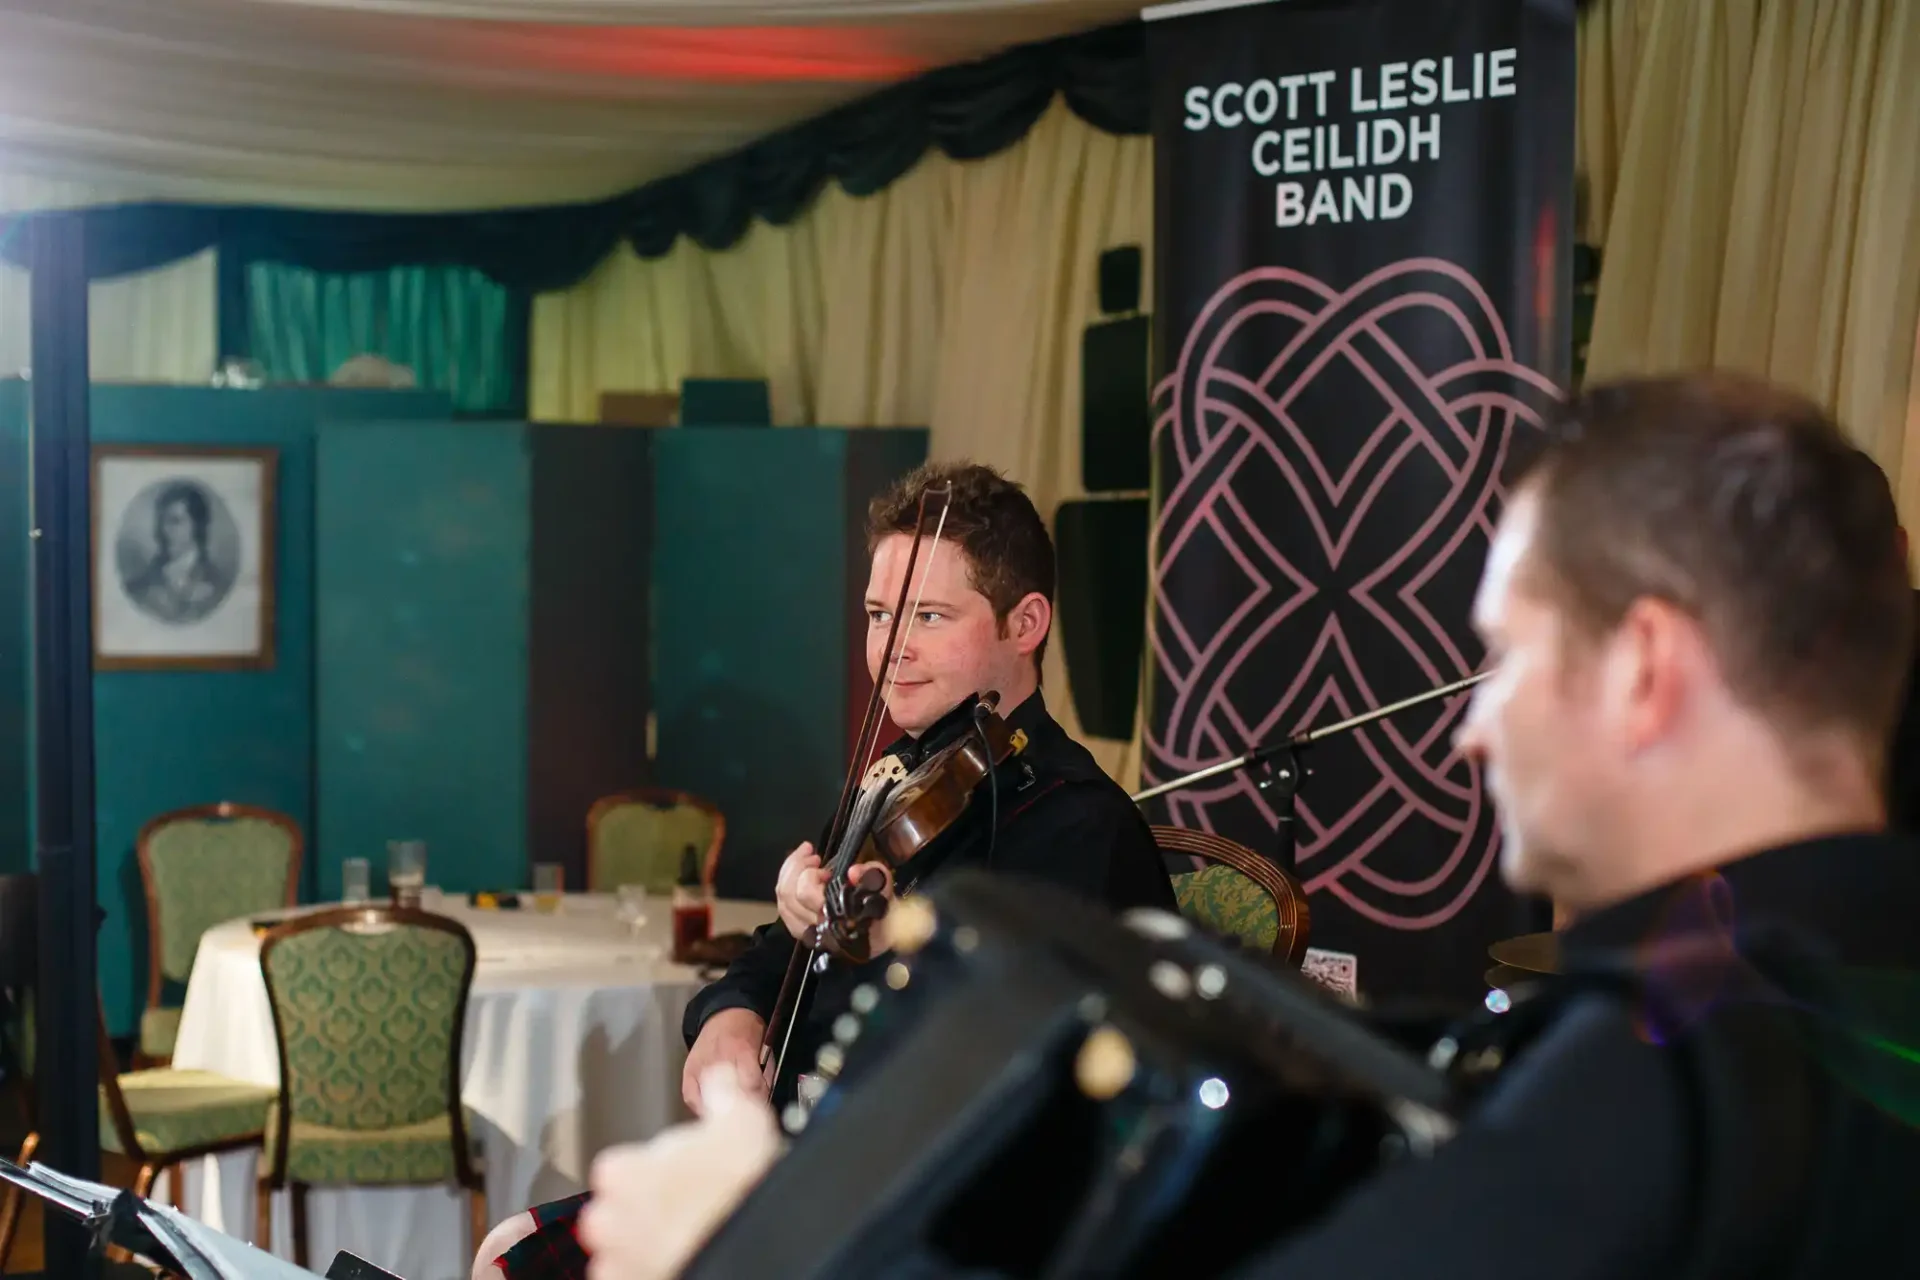 Violinist performing on stage with the scott leslie ceilidh band, viewed over the shoulder of another band member in a warmly lit room with event decor.